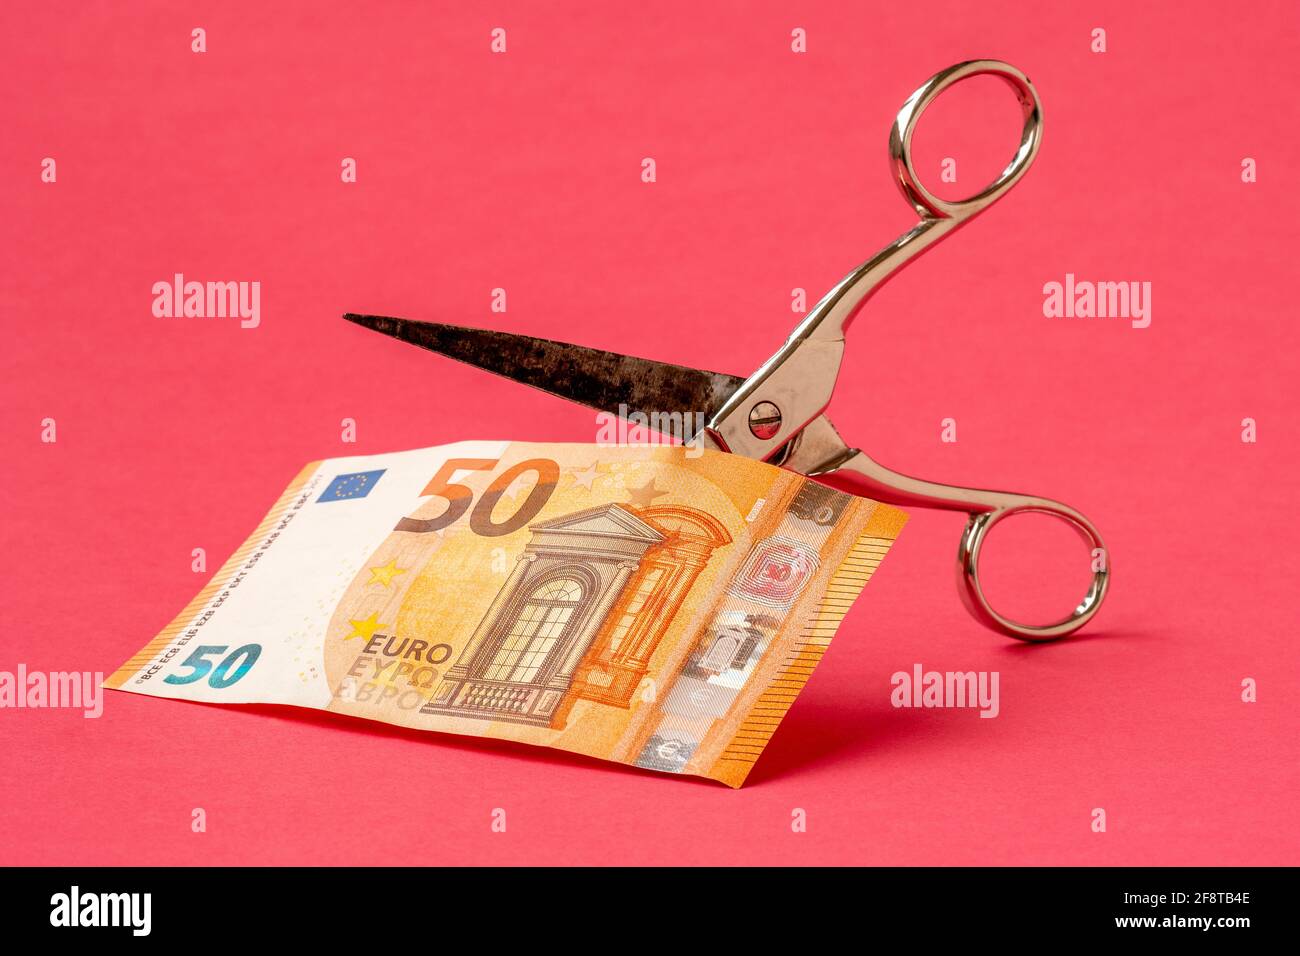 Cutting fifty Euro with scissors on pink background. Concept on the topic of devaluation of money. Stock Photo